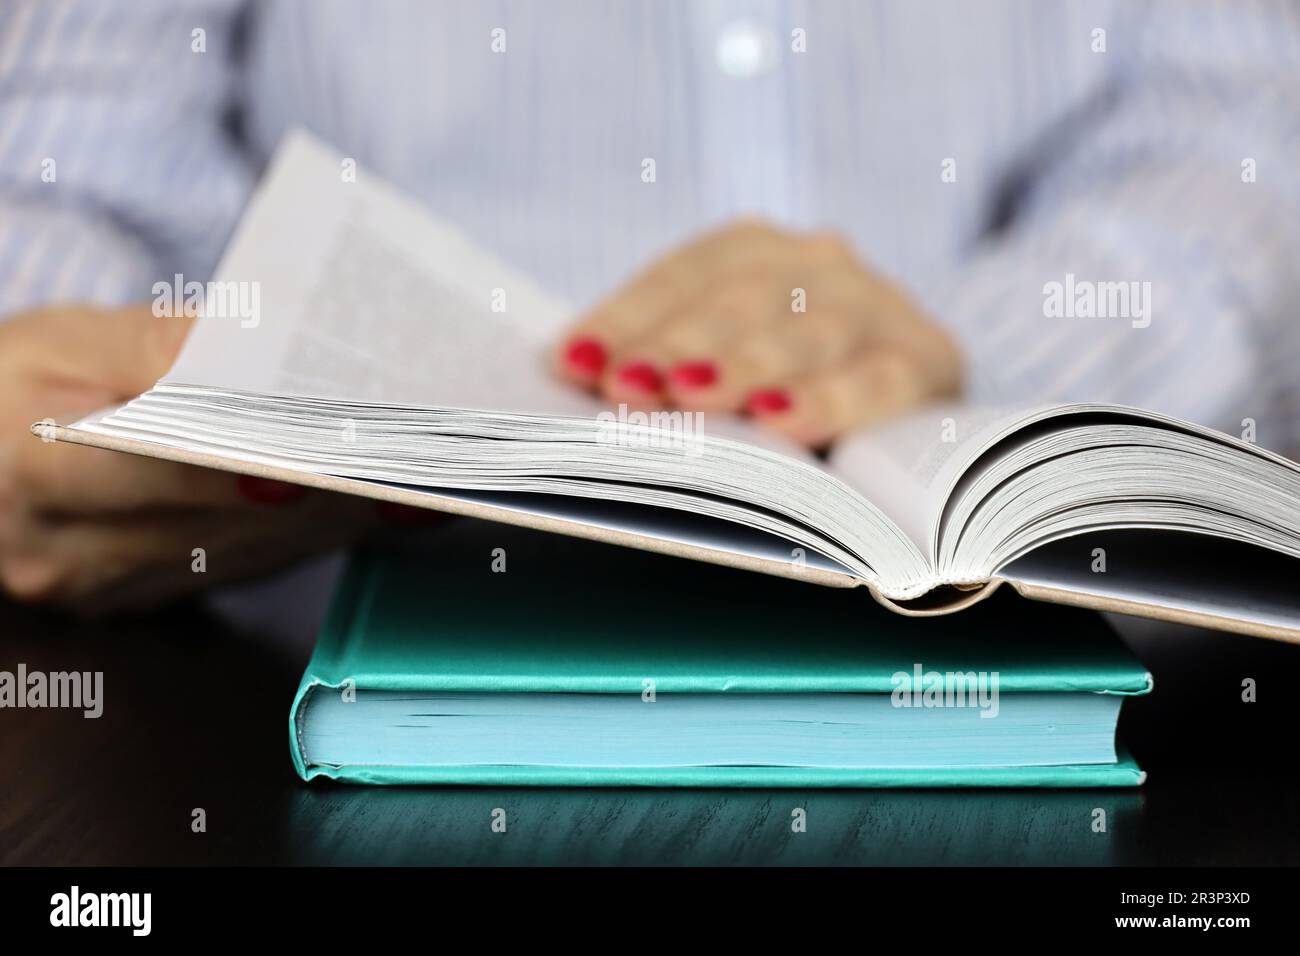 Woman reading a book while sitting at table. Concept of education and literature Stock Photo